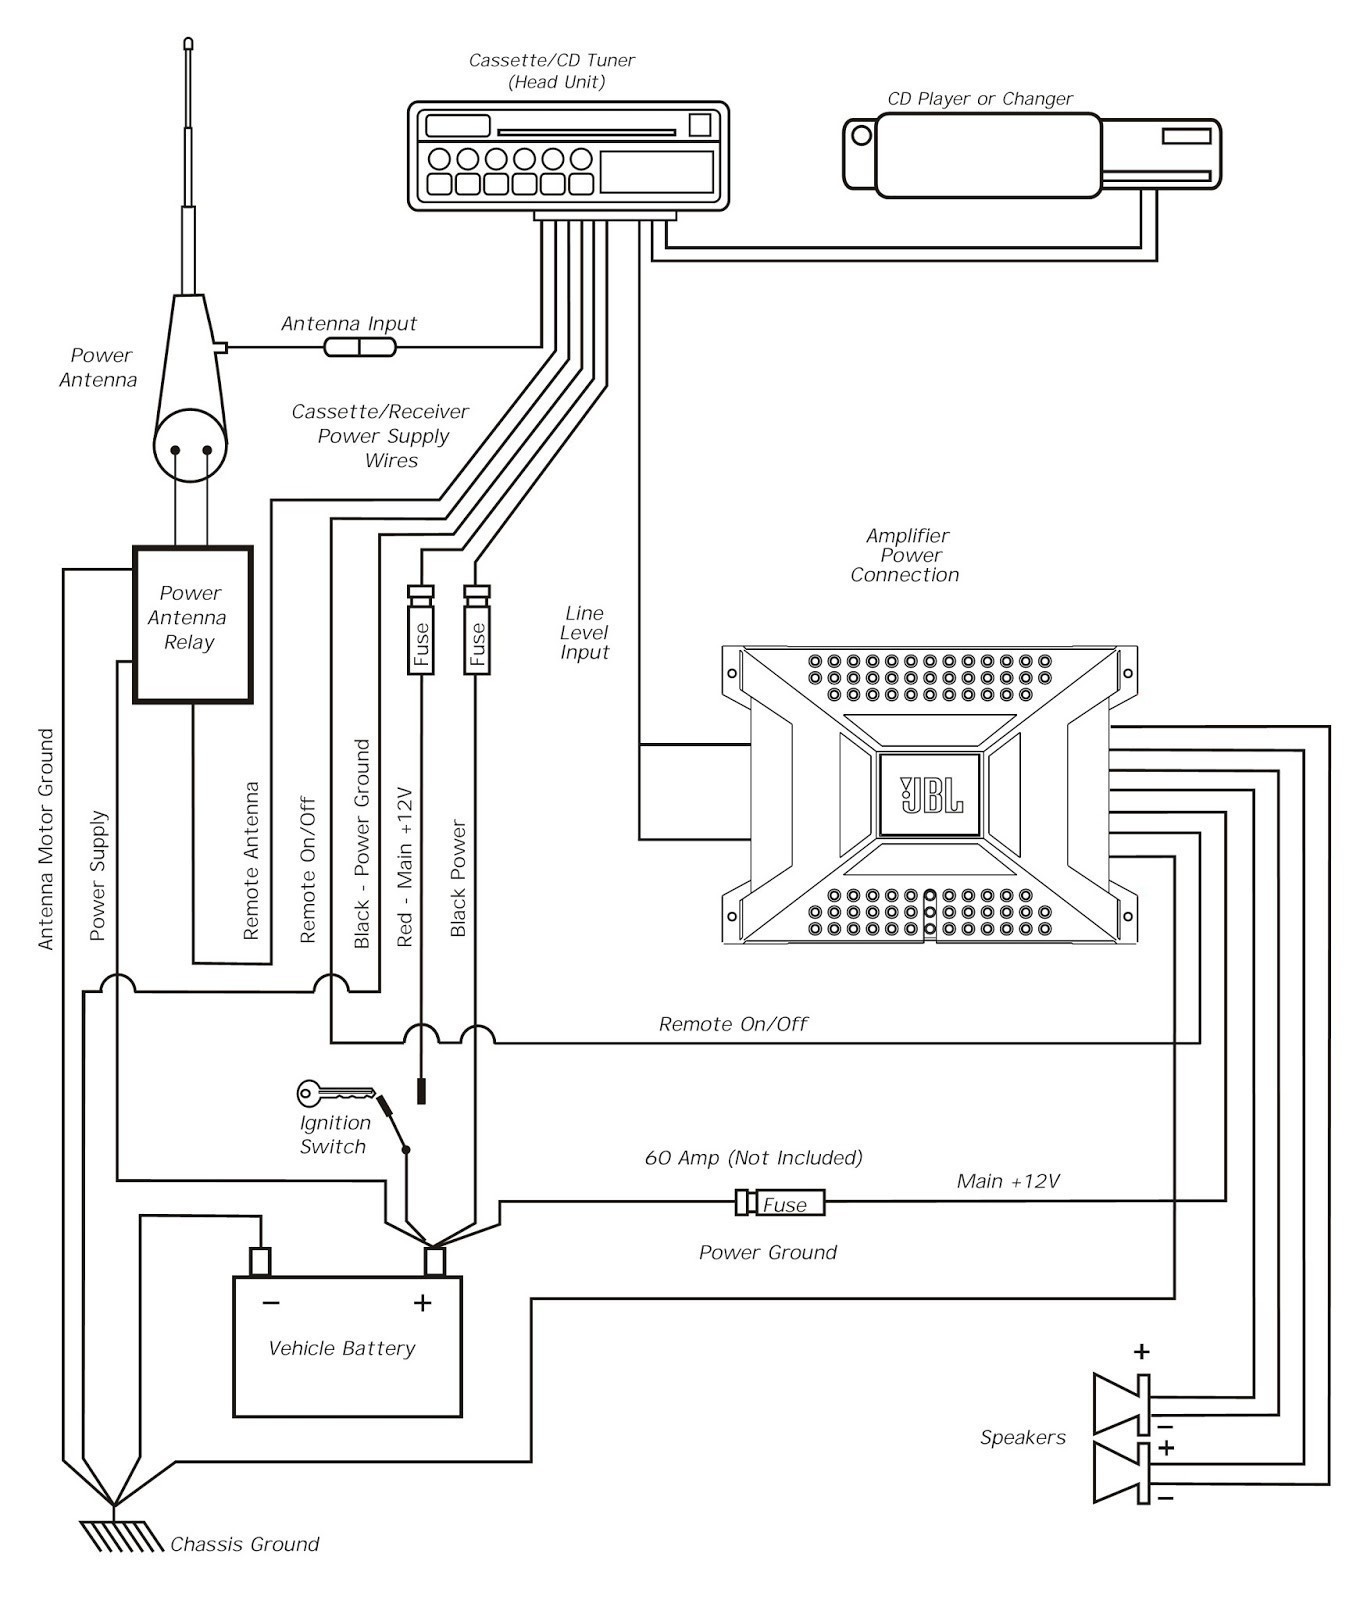 Wiring Diagram for 4 Channel Car Amplifier Fresh Kicker Amplifier Wiring Diagram Refrence Awesome Amp Wiring